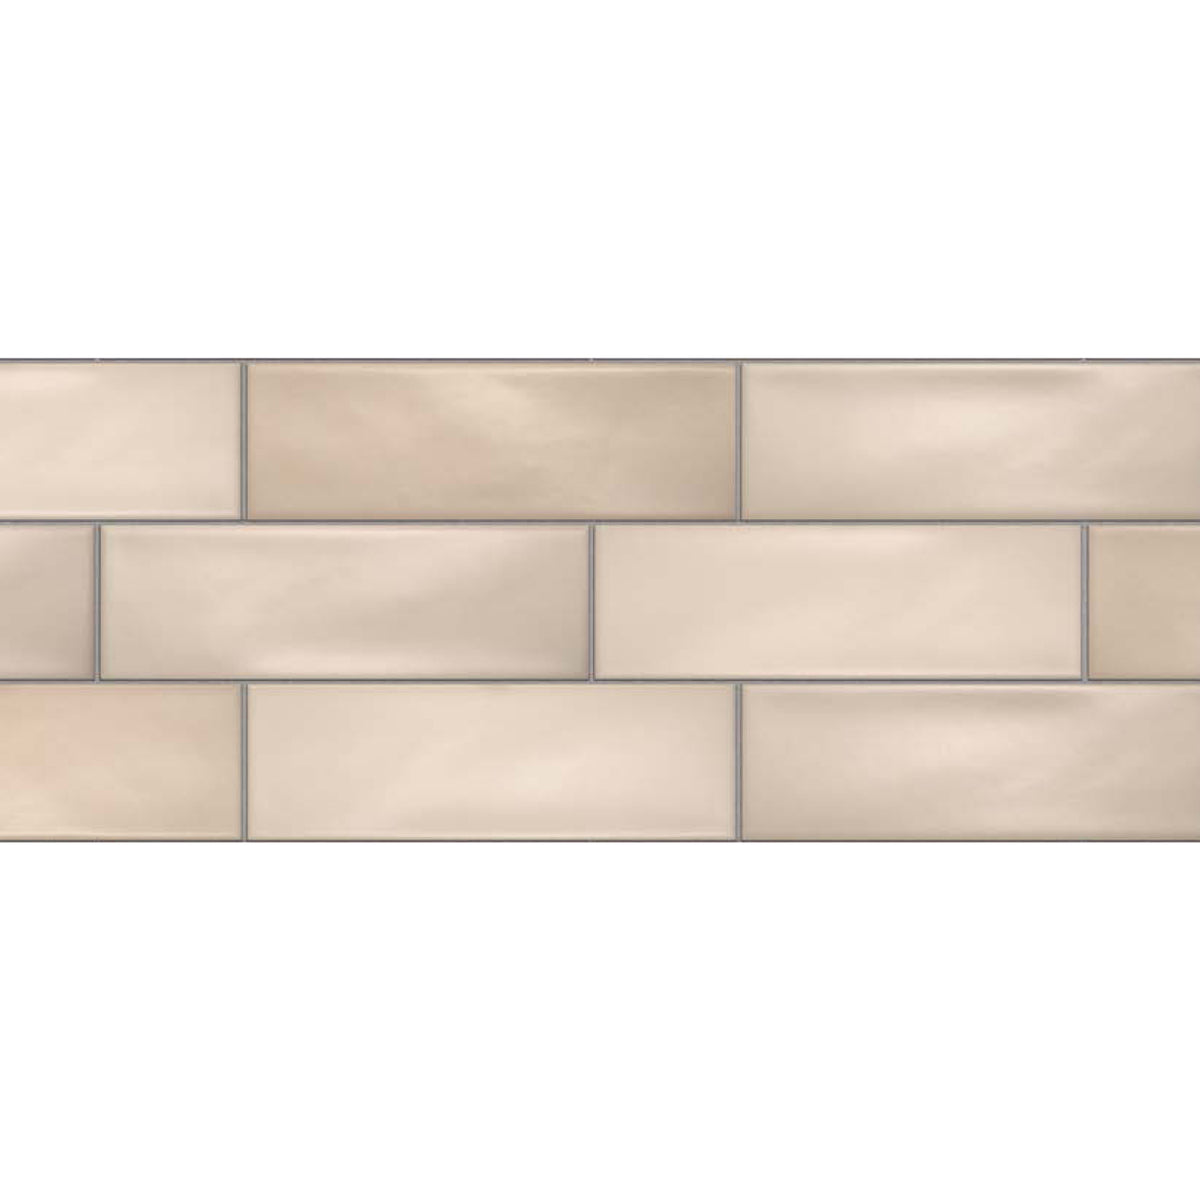 Topcu - Chalky - 2.5 in. x 8 in. Ceramic Wall Tile - Sand Installed